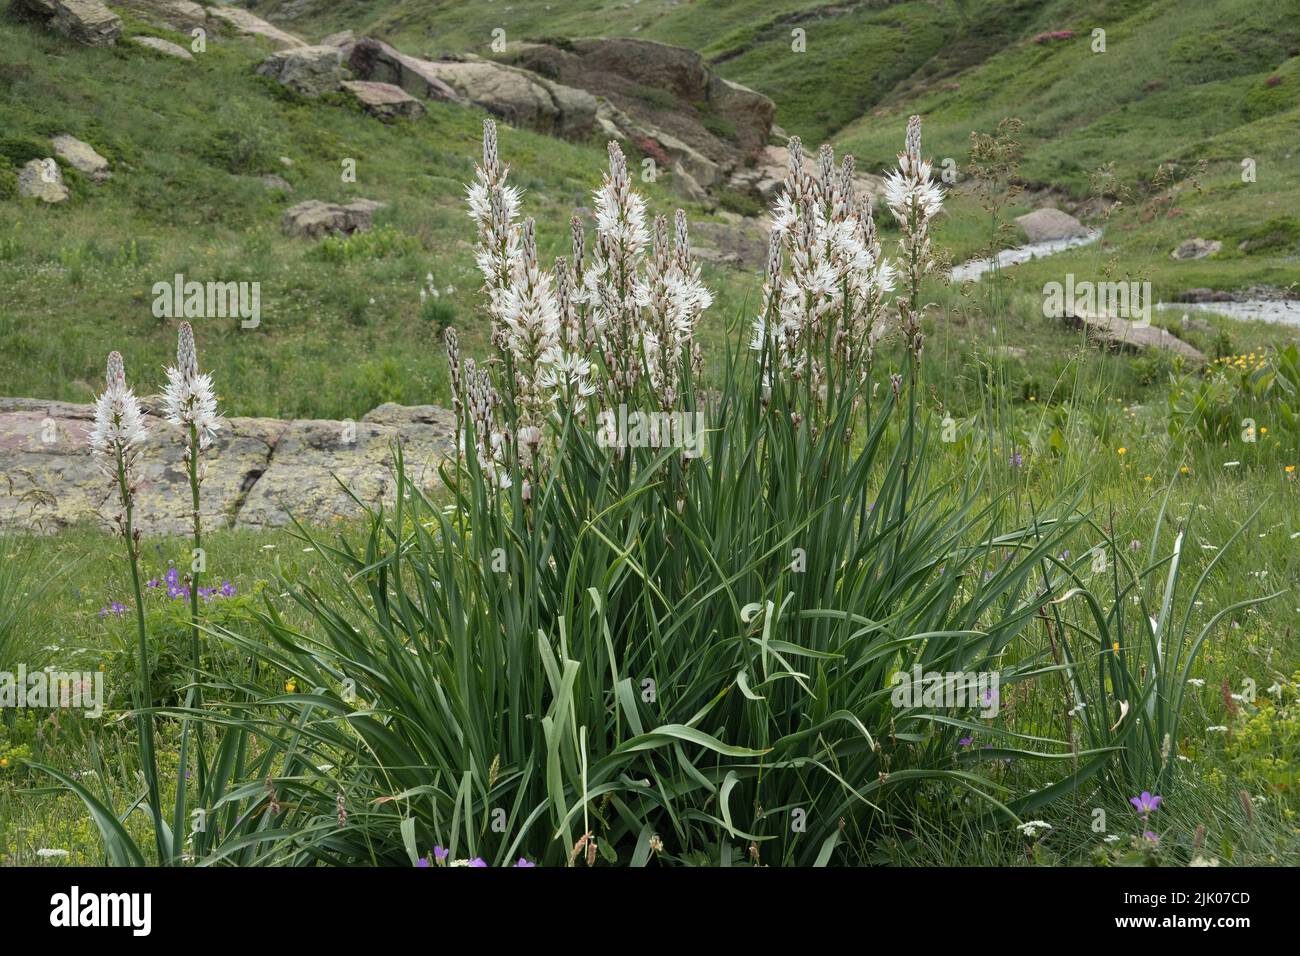 White asphodels, plants with long stalks and white flowers, in alpine landscape Stock Photo